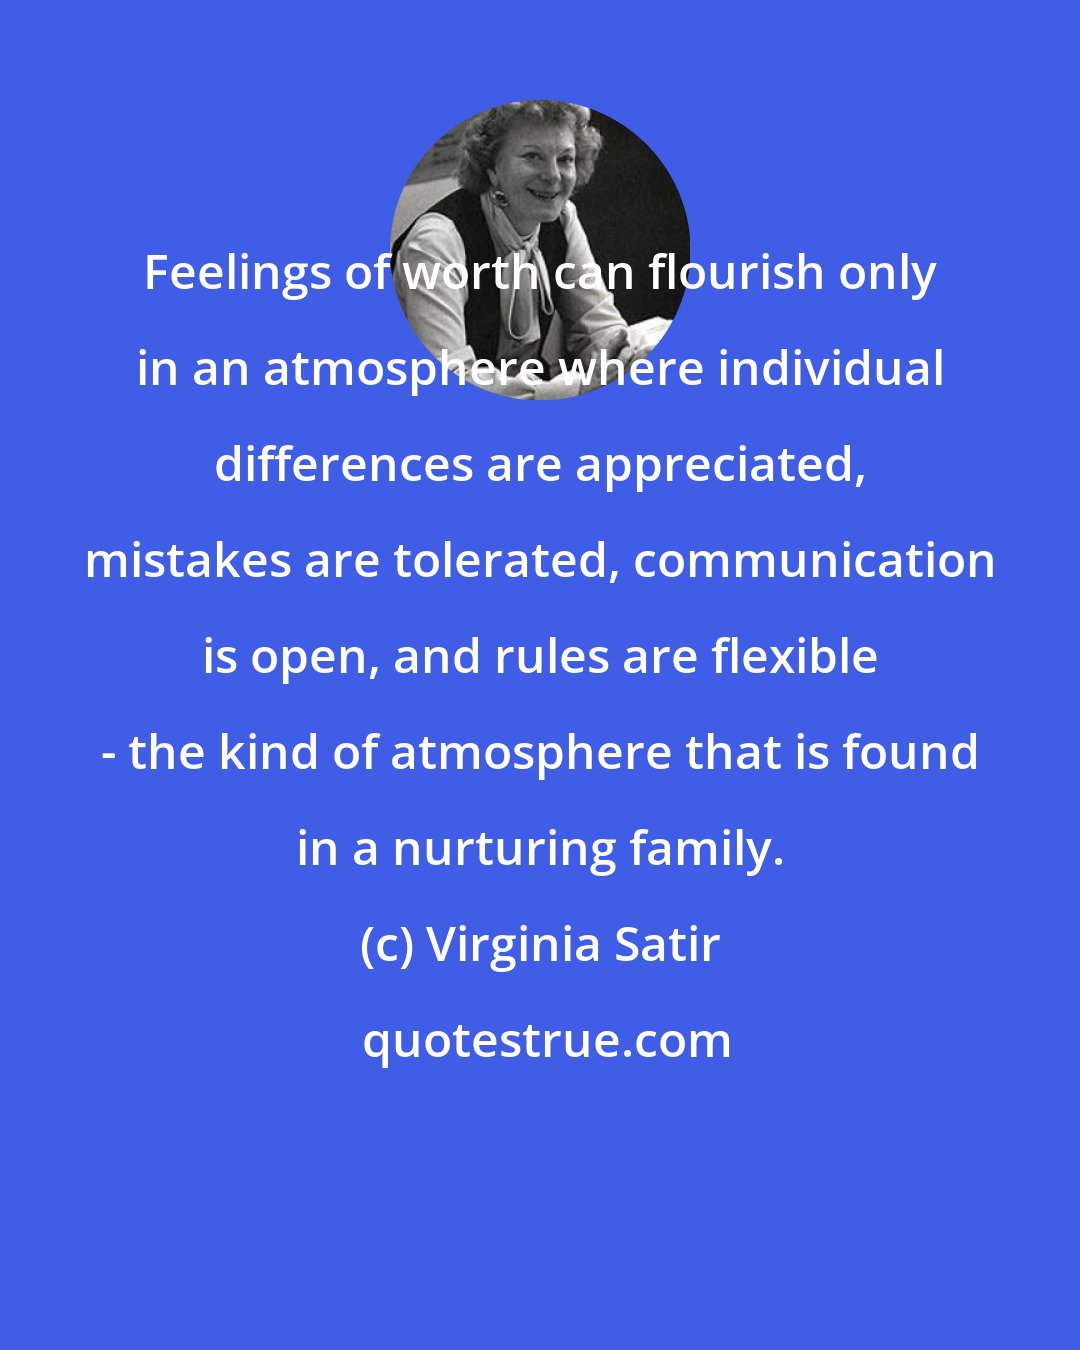 Virginia Satir: Feelings of worth can flourish only in an atmosphere where individual differences are appreciated, mistakes are tolerated, communication is open, and rules are flexible - the kind of atmosphere that is found in a nurturing family.